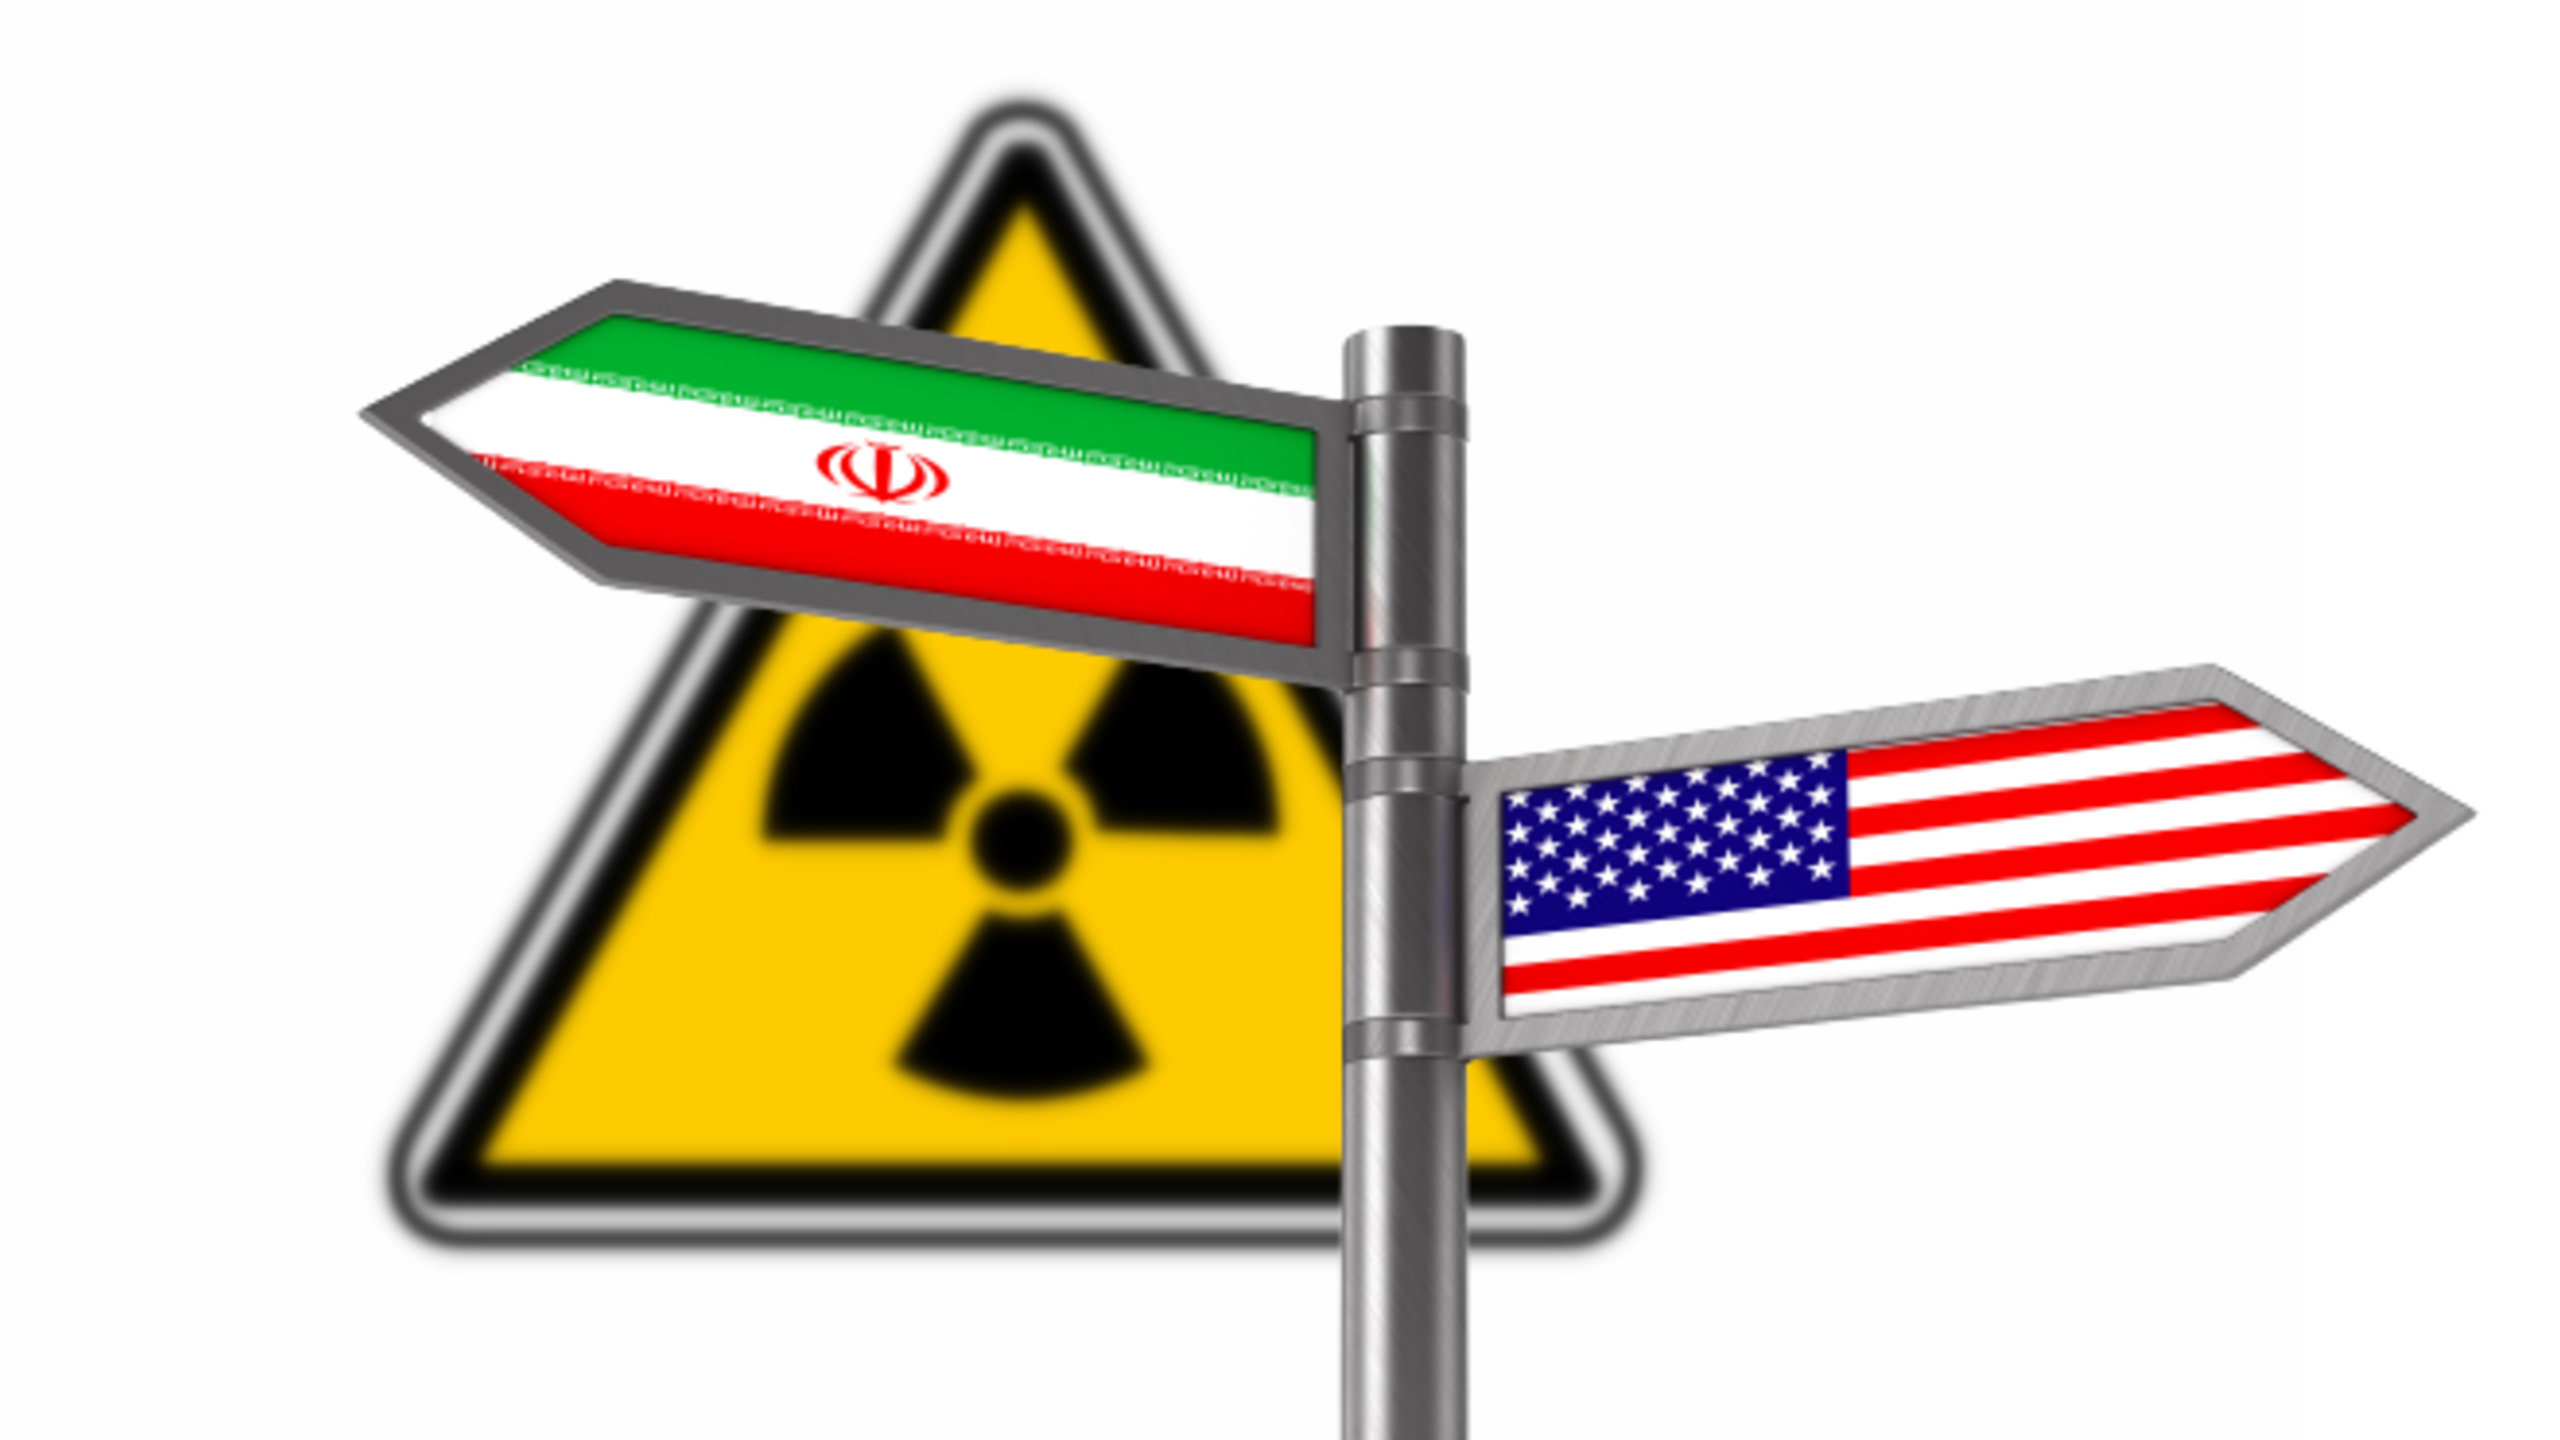 Discovery of Uranium Traces Unlikely to Derail US-Iran Talks, Experts Say